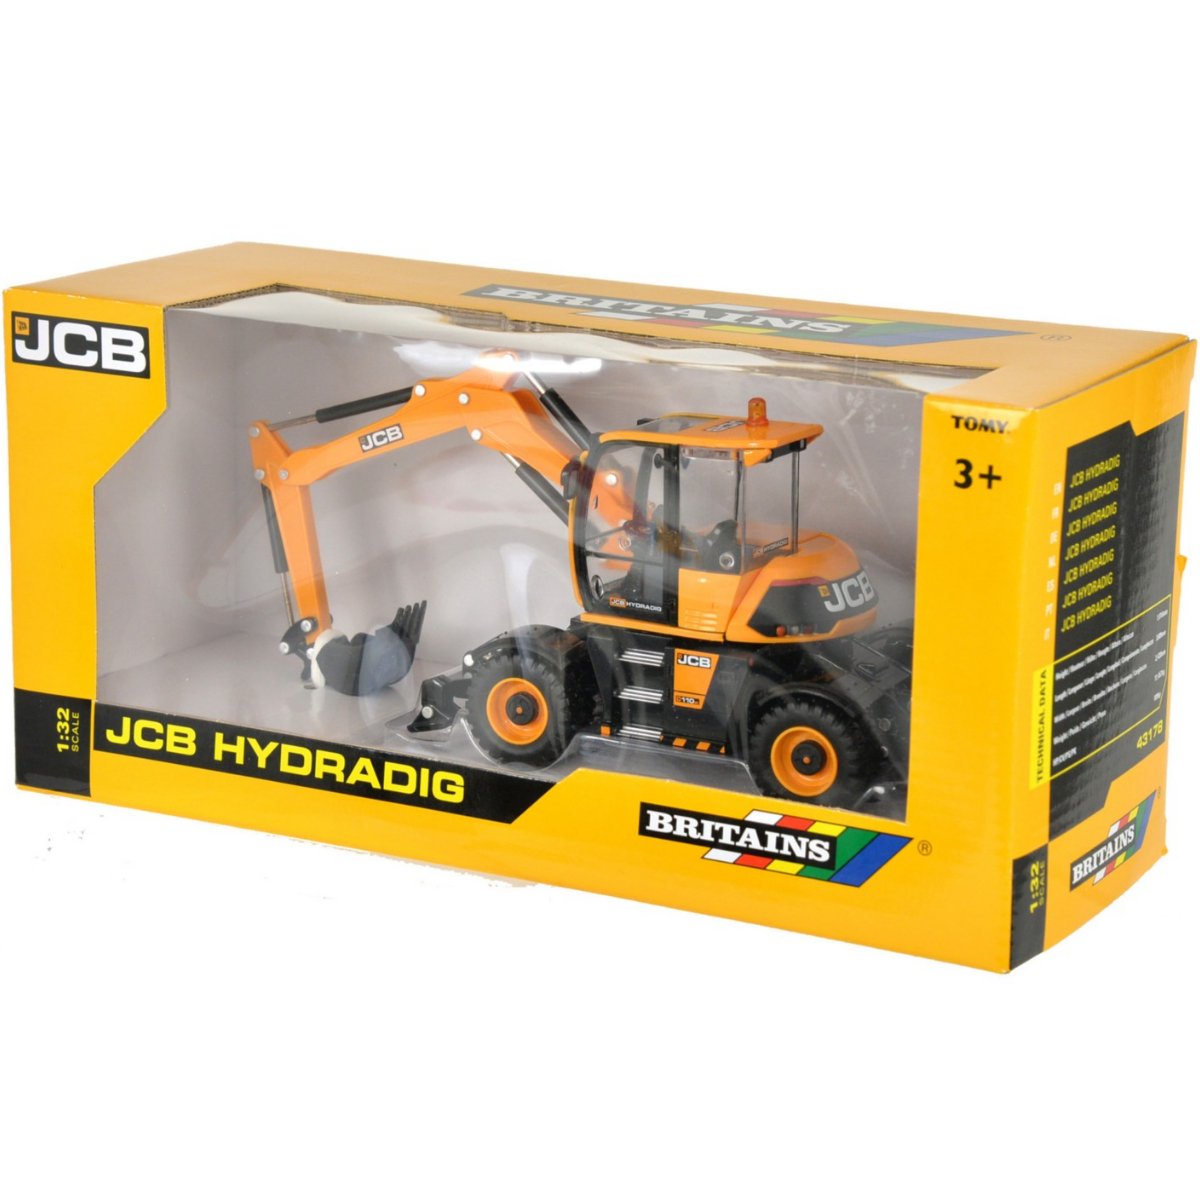 Britains JCB Hydradig - 1:32 Scale - Phillips Hobbies